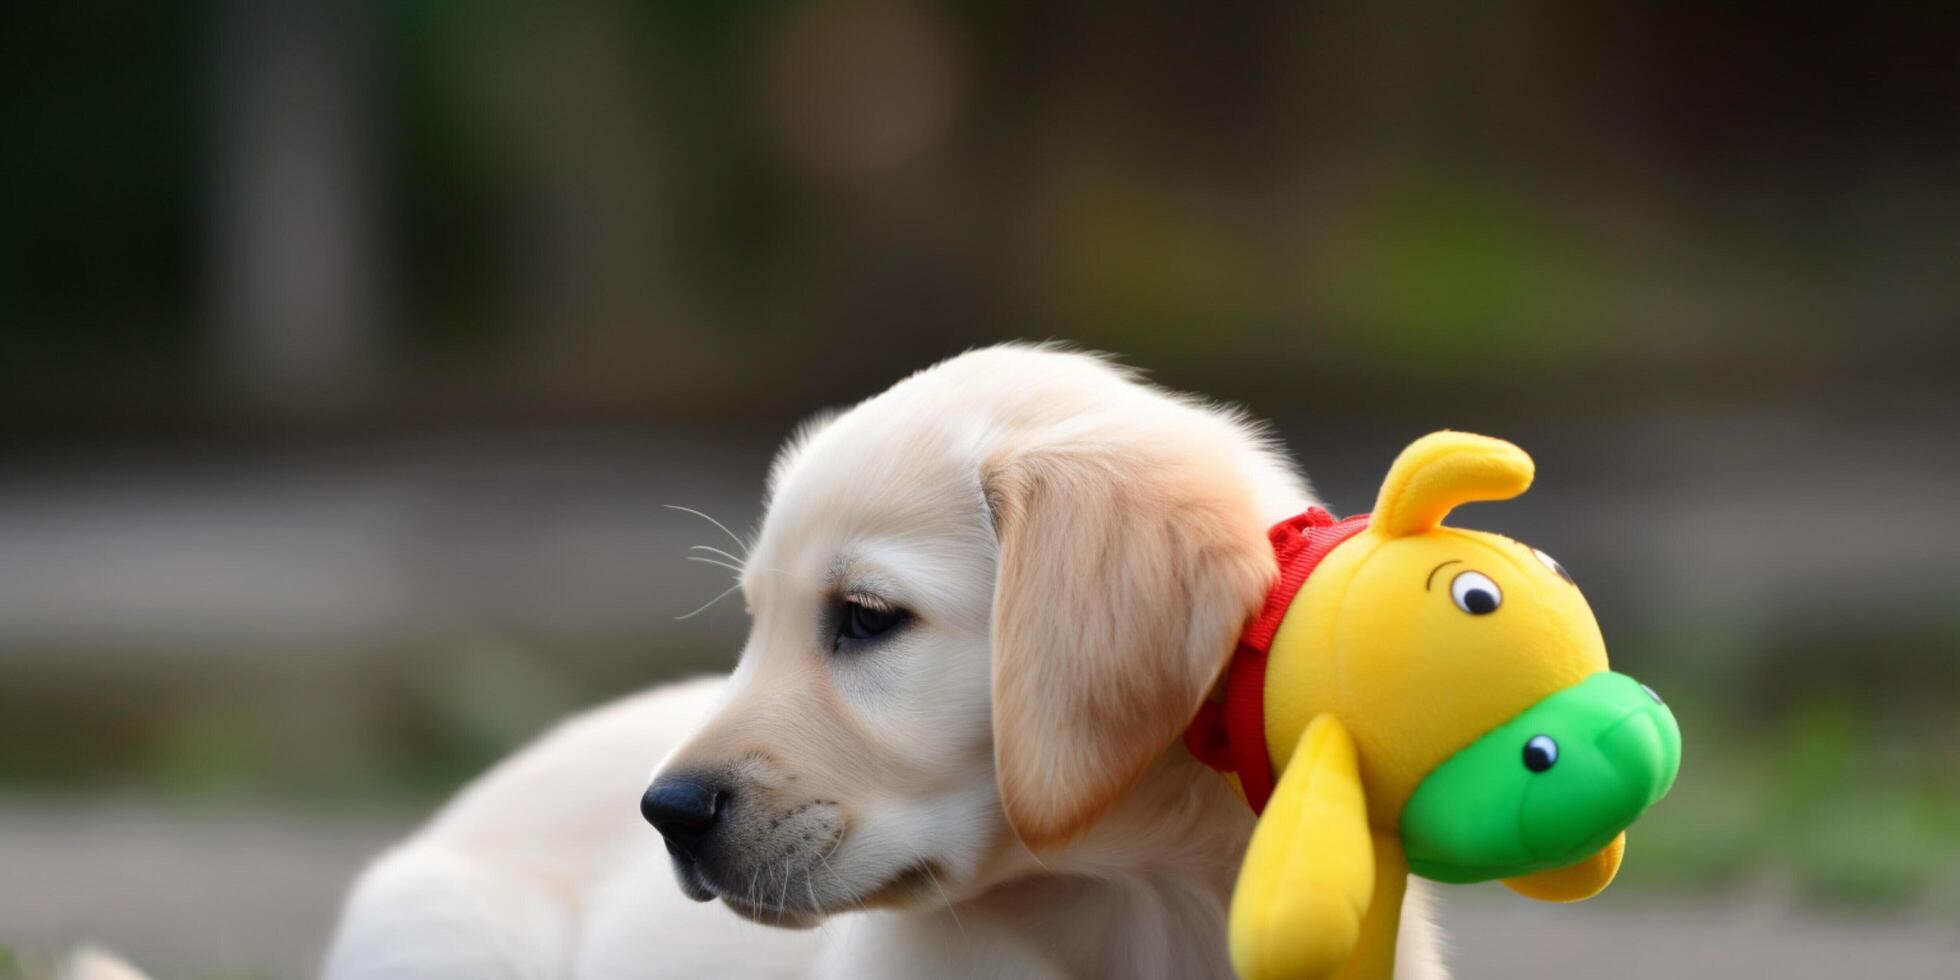 A puppy with a toy on its head photo